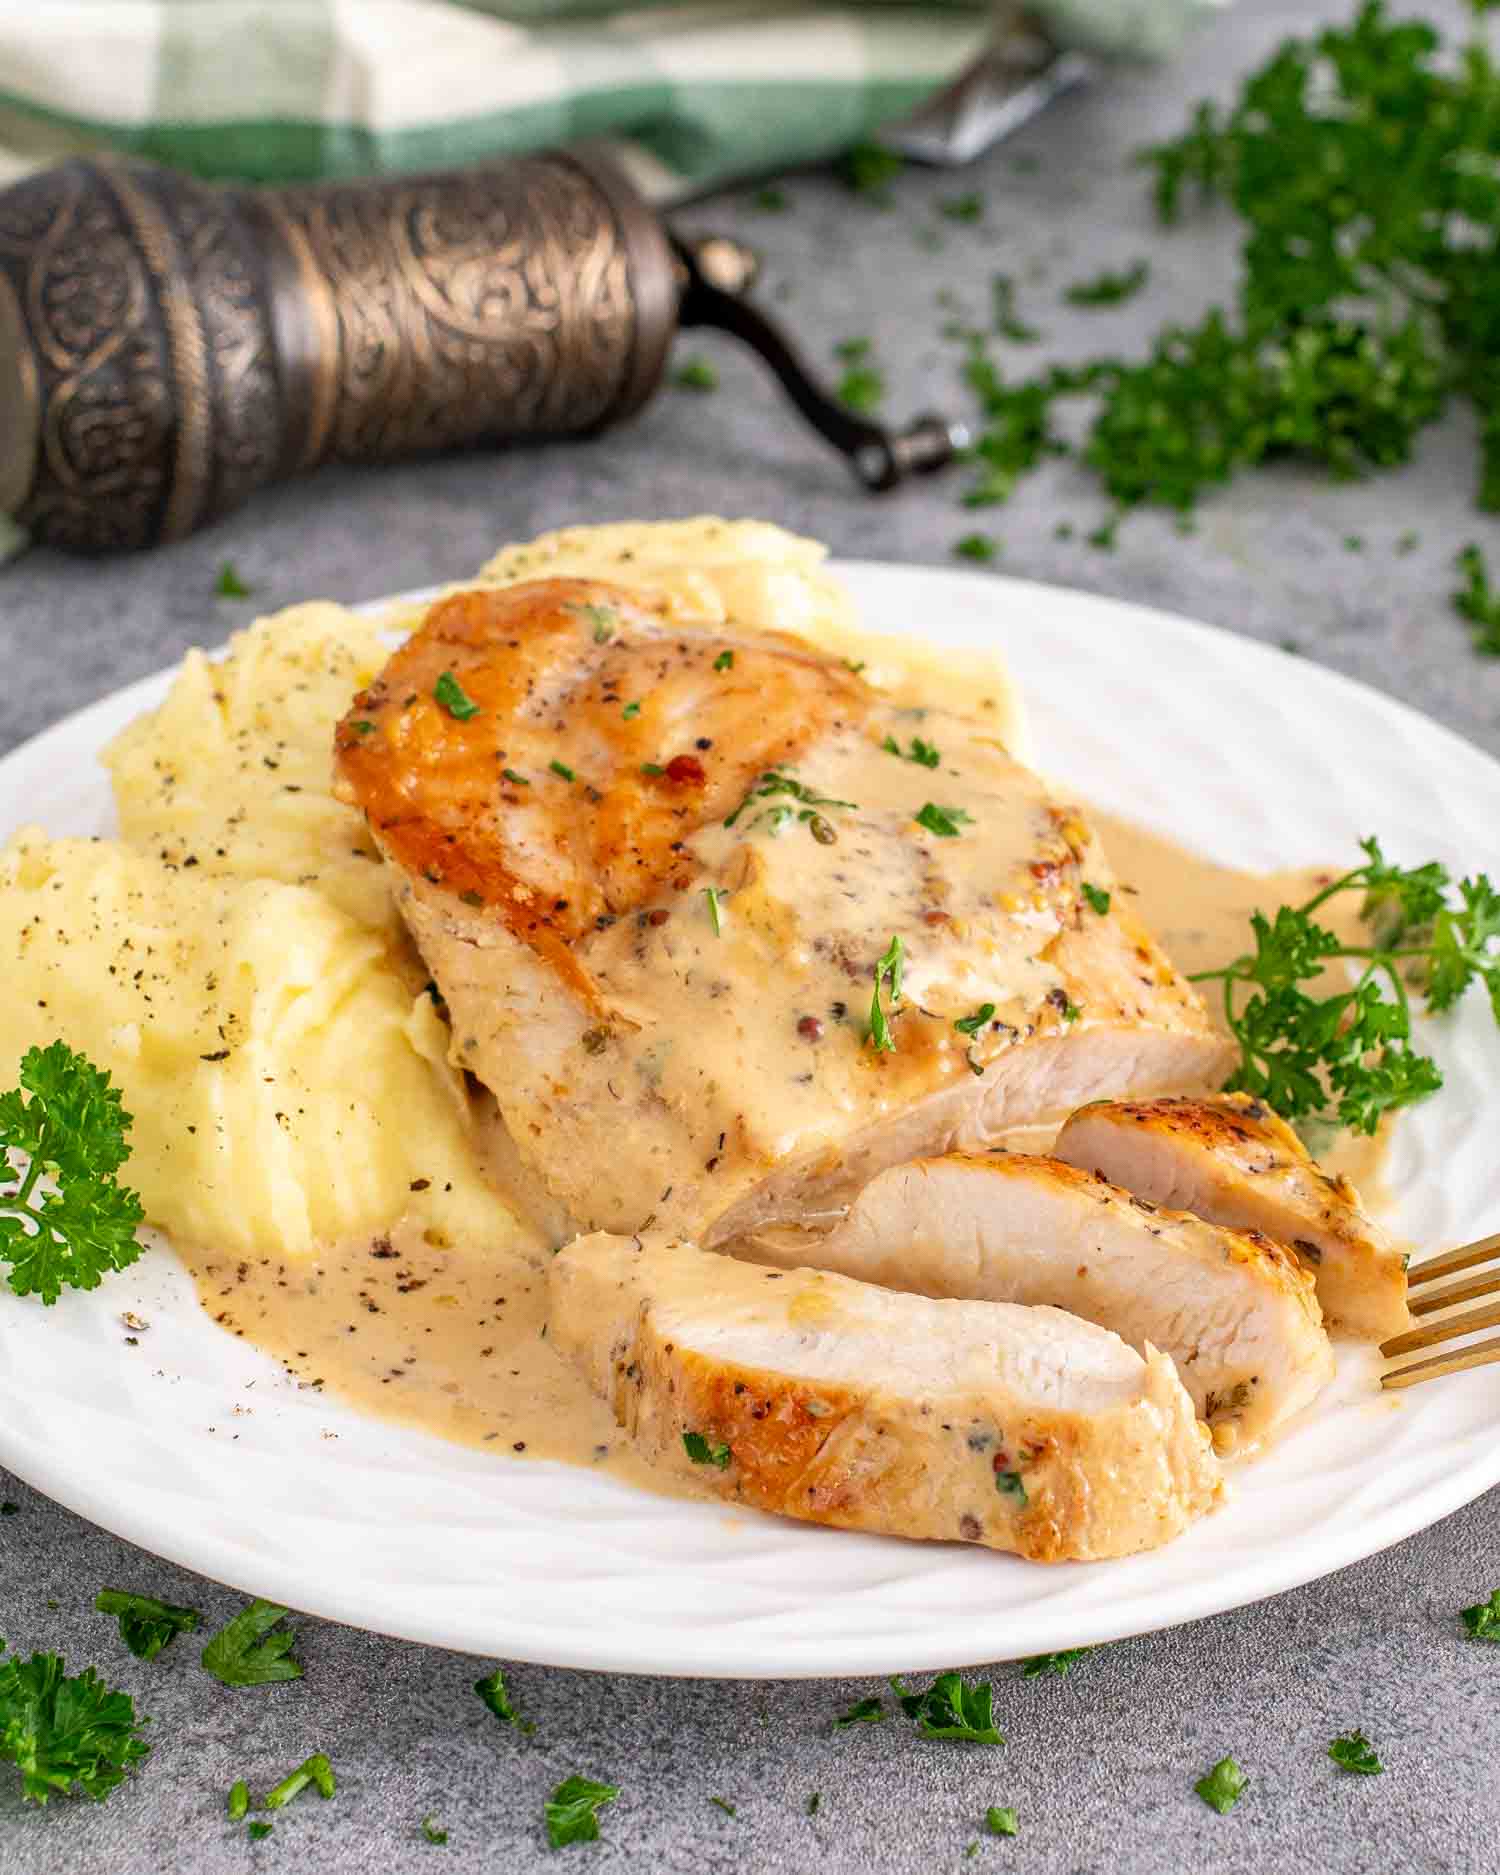 a serving of creamy mustard chicken breast along side some mashed potatoes garnished with parsley.